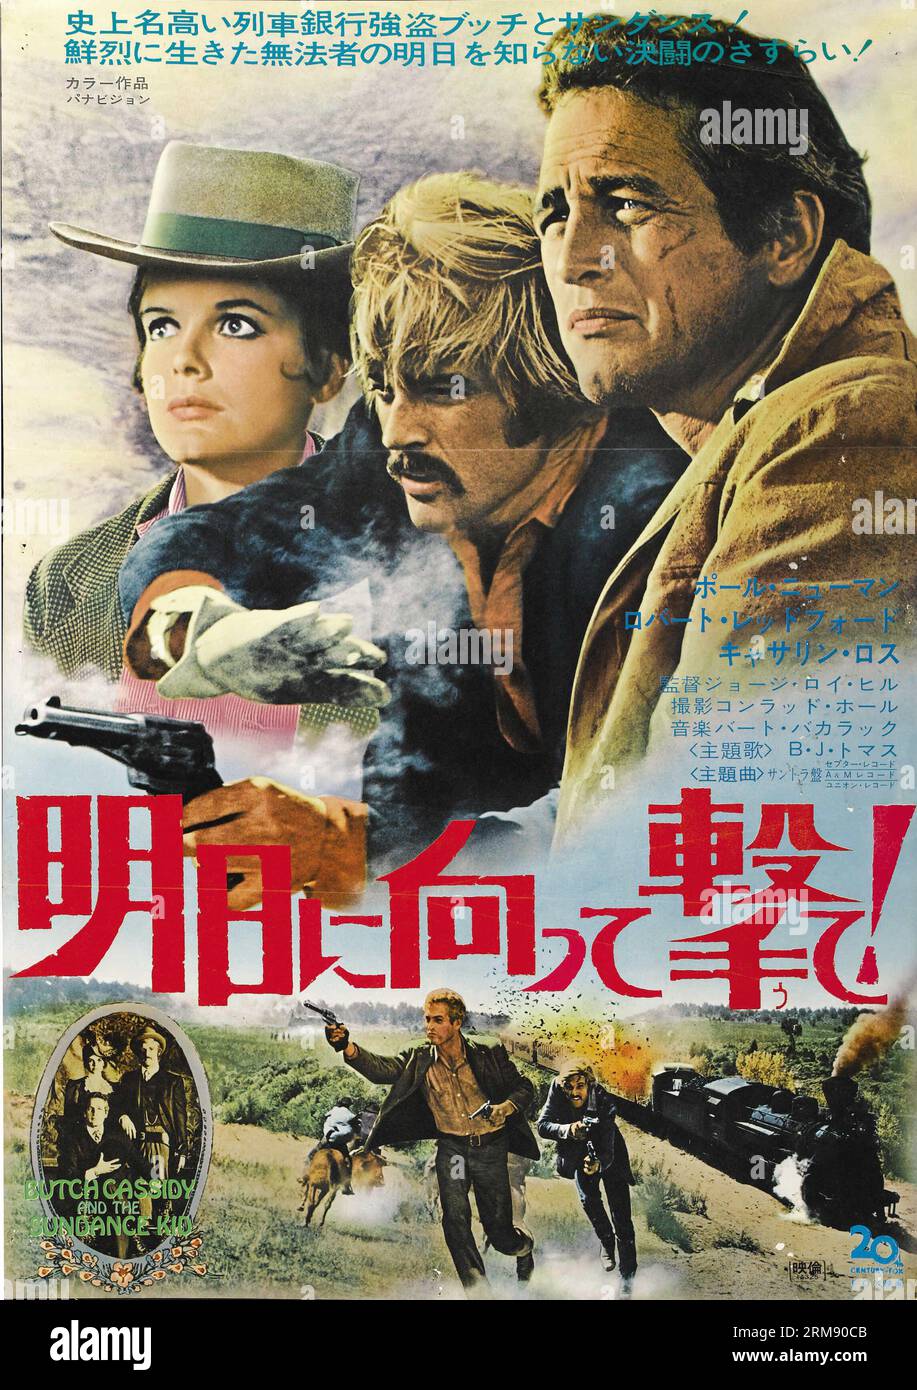 Butch Cassidy and the Sundance Kid (20th Century Fox, 1969) Japanese Film Poster Stock Photo